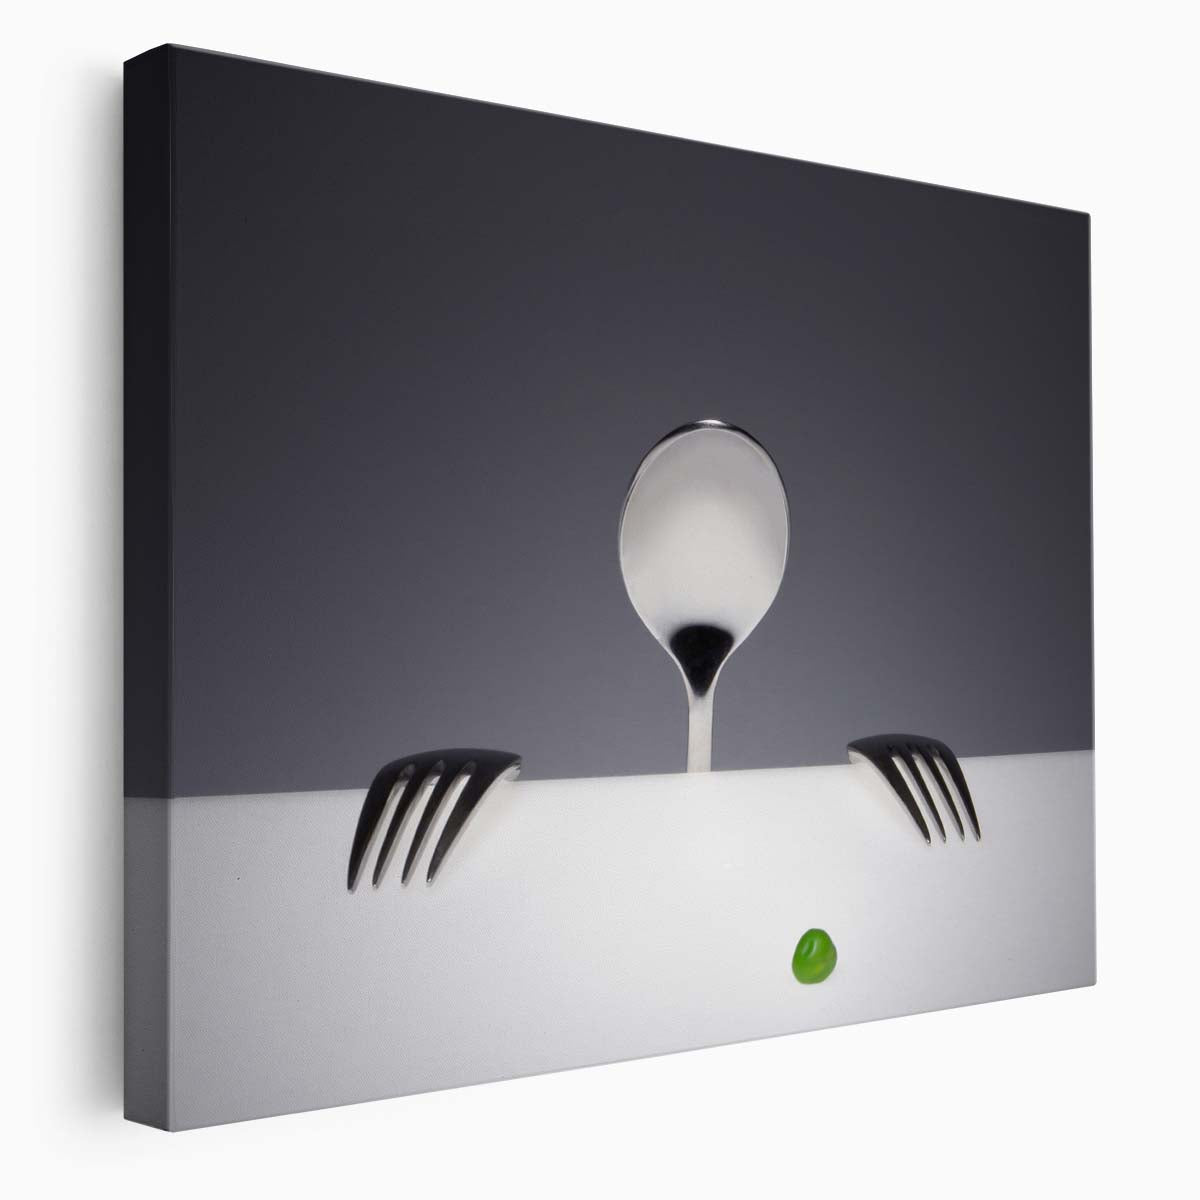 Hungry Cutlery & Peas Humorous Kitchen Wall Art by Luxuriance Designs. Made in USA.